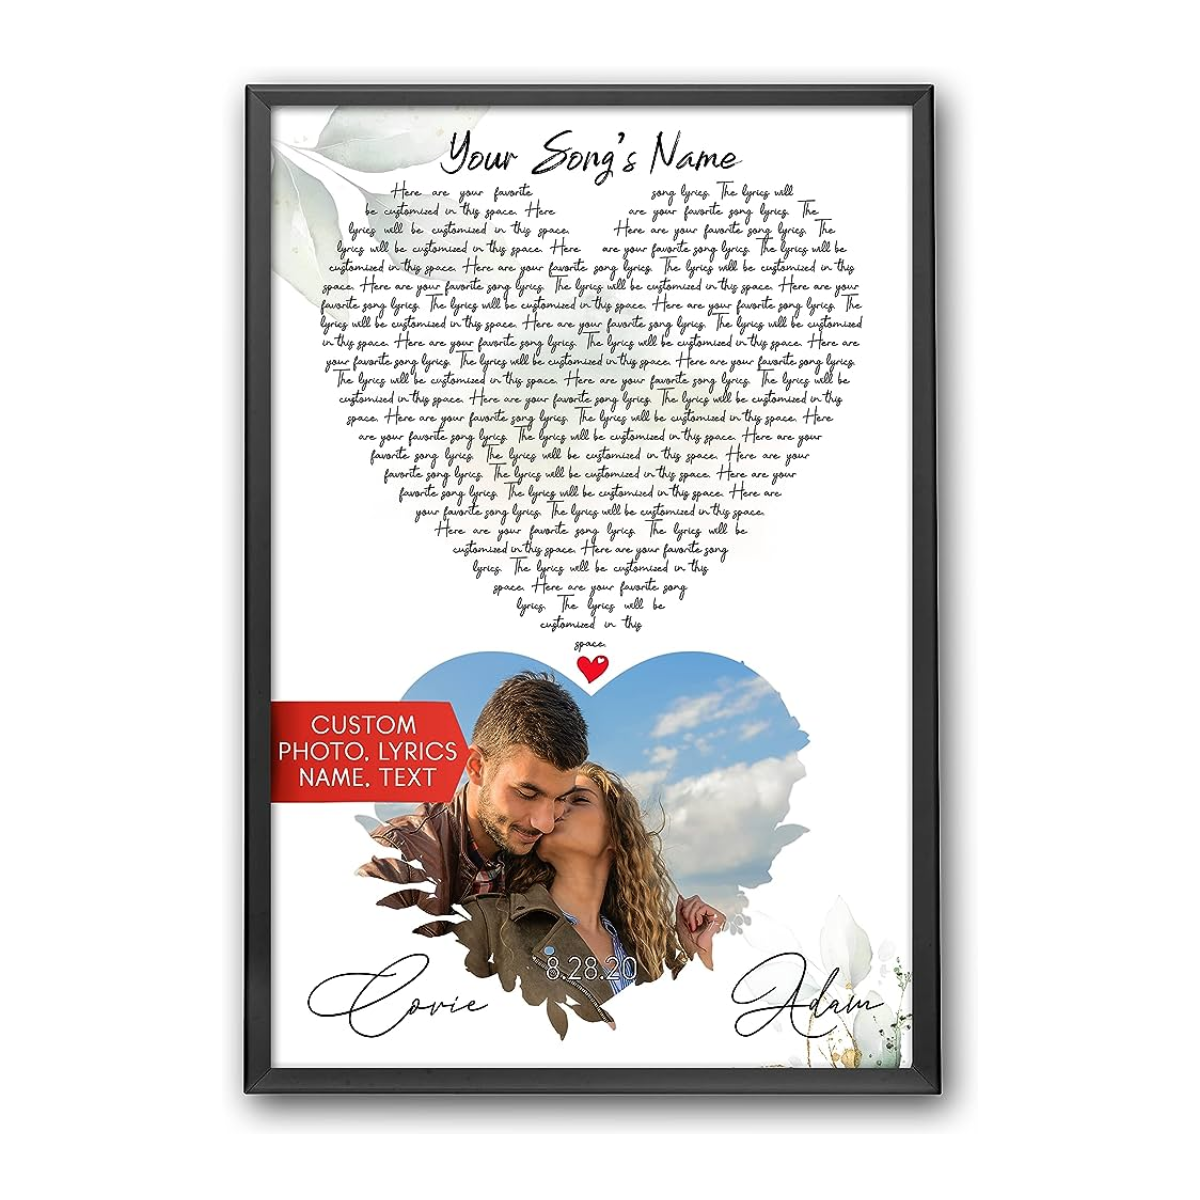 35. Capture Your Love Story Forever with a Customized Love Song Lyrics Print